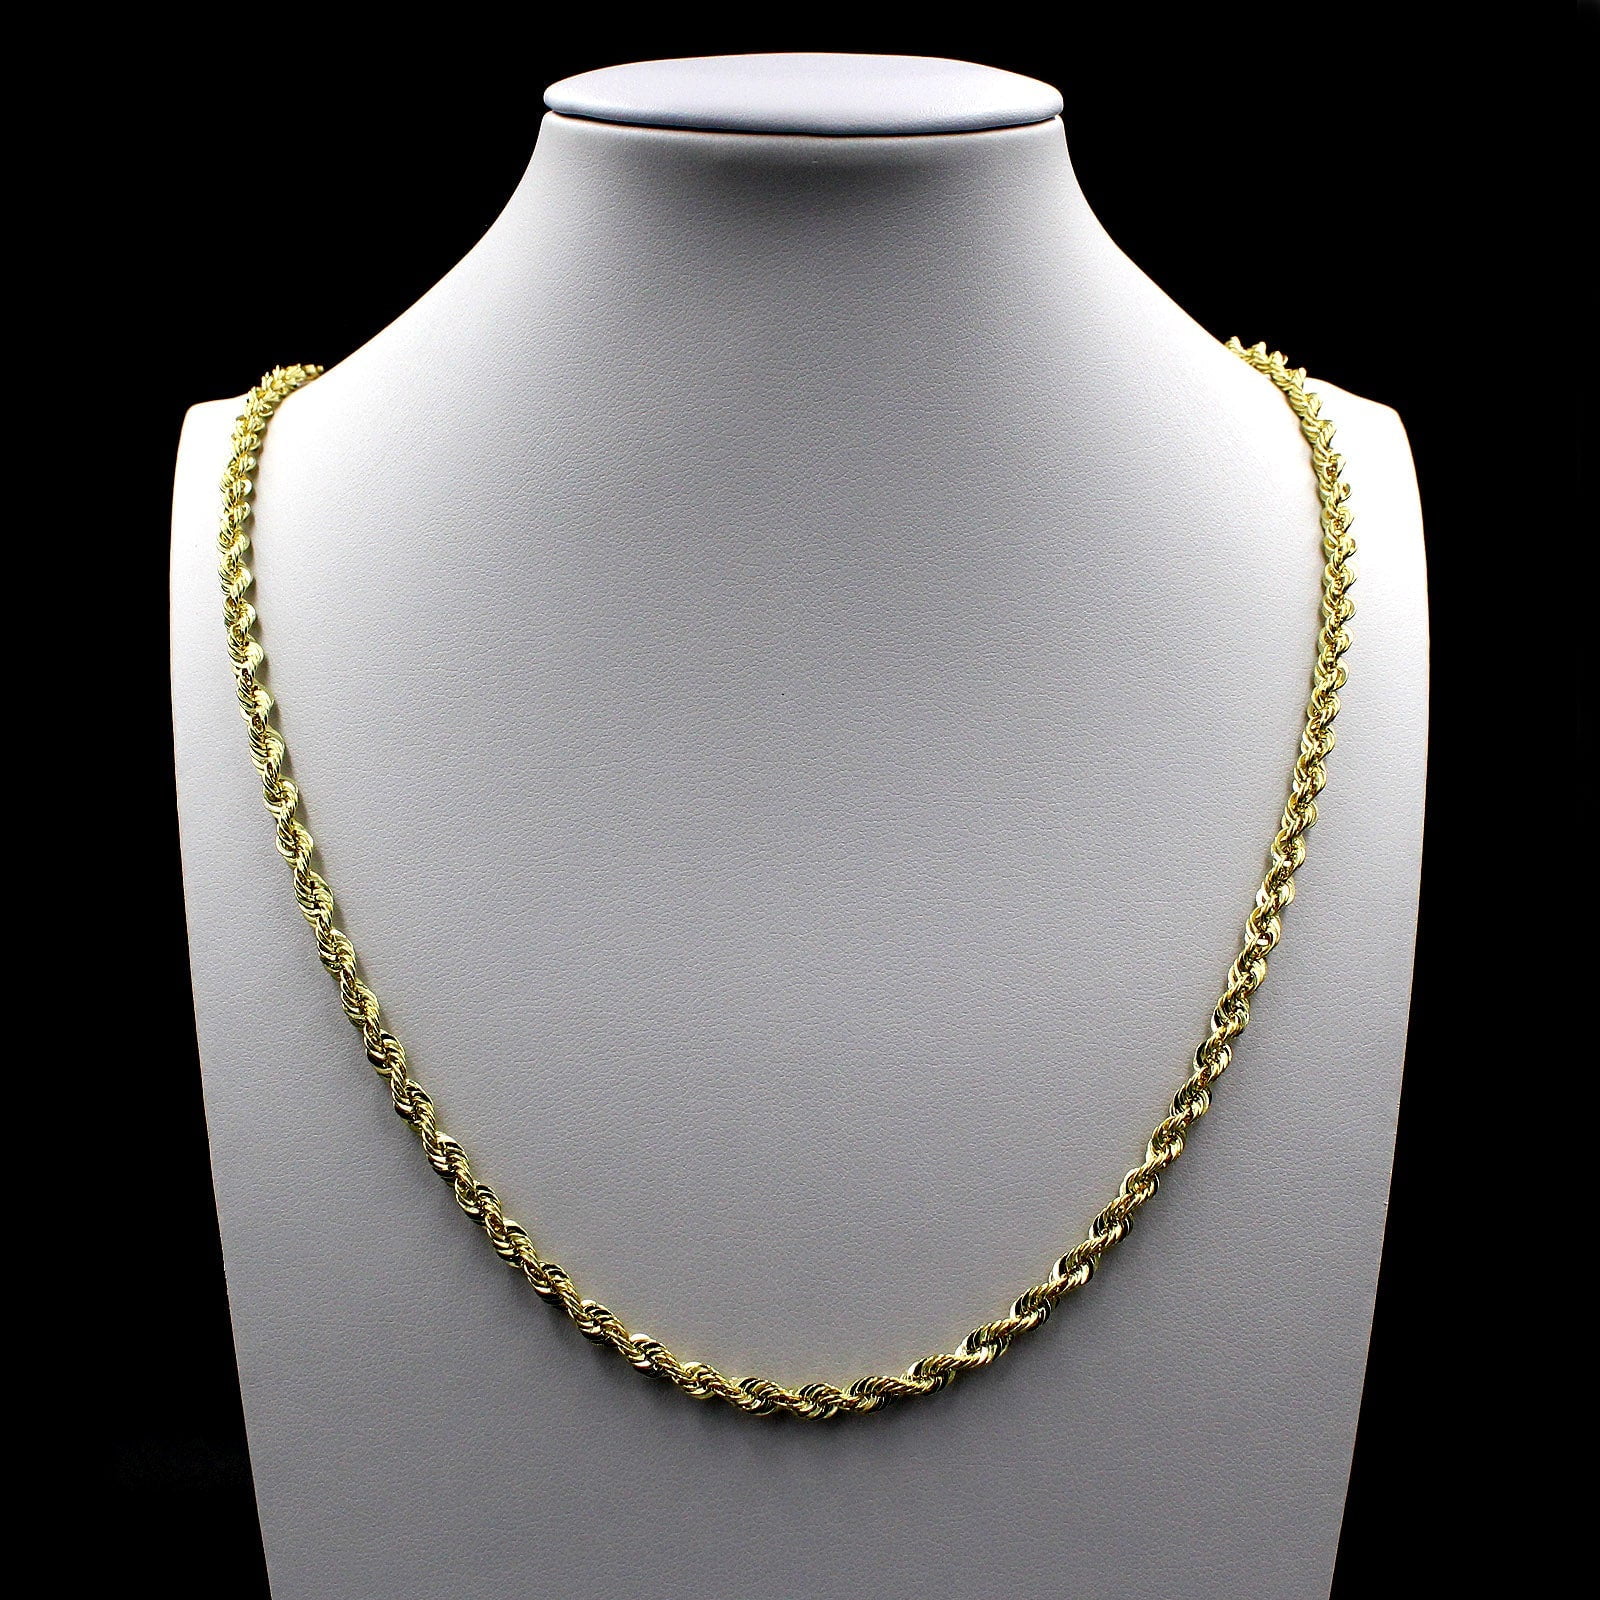 Hip Hop Rope Chain Necklace 20" 22" 24" 26" 30" inch 14K Gold Finish